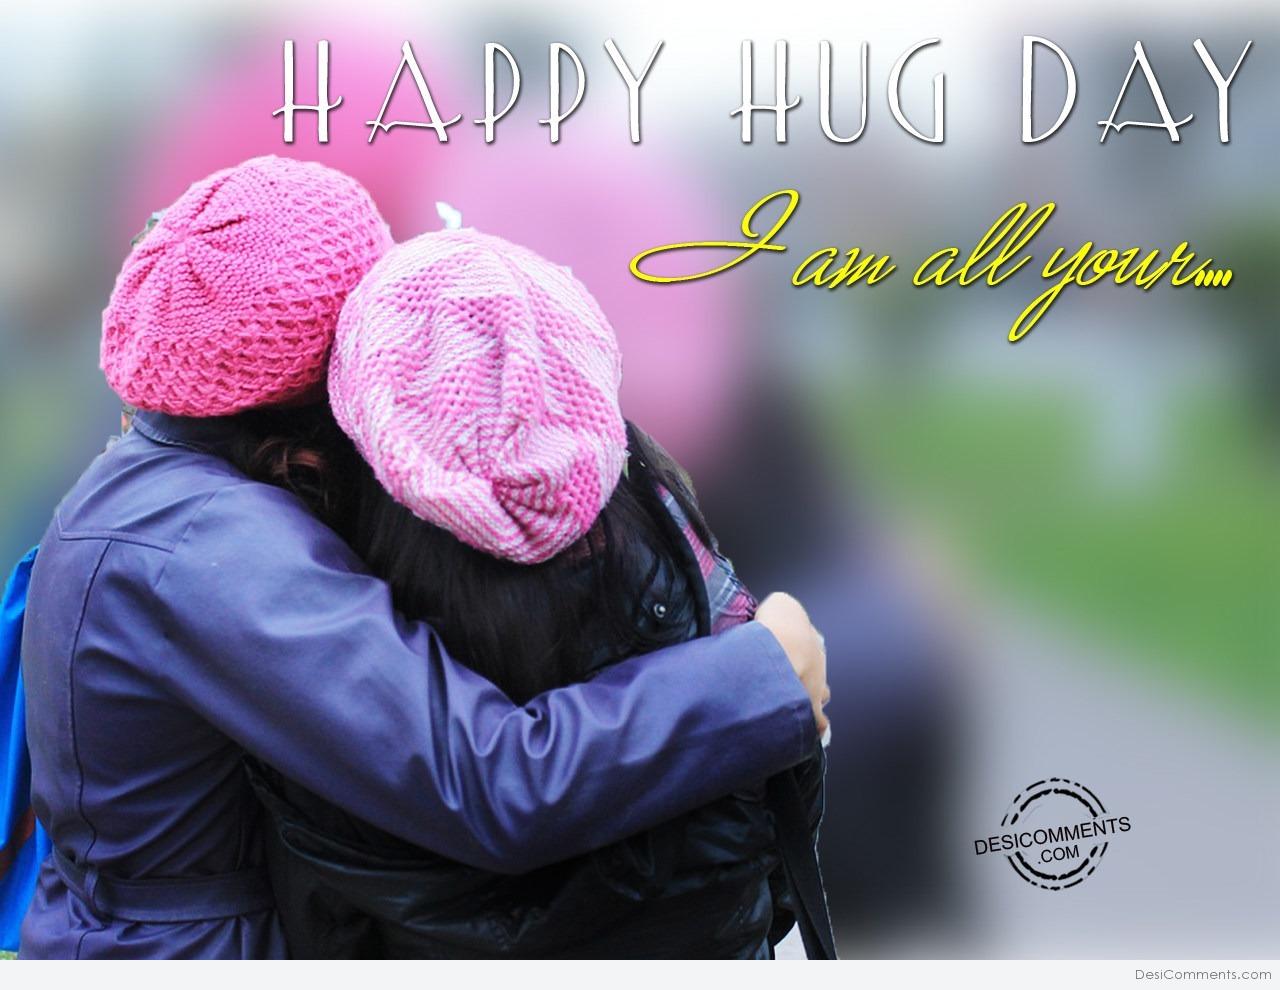 Happy Hug Day- I am all Yours - DesiComments.com